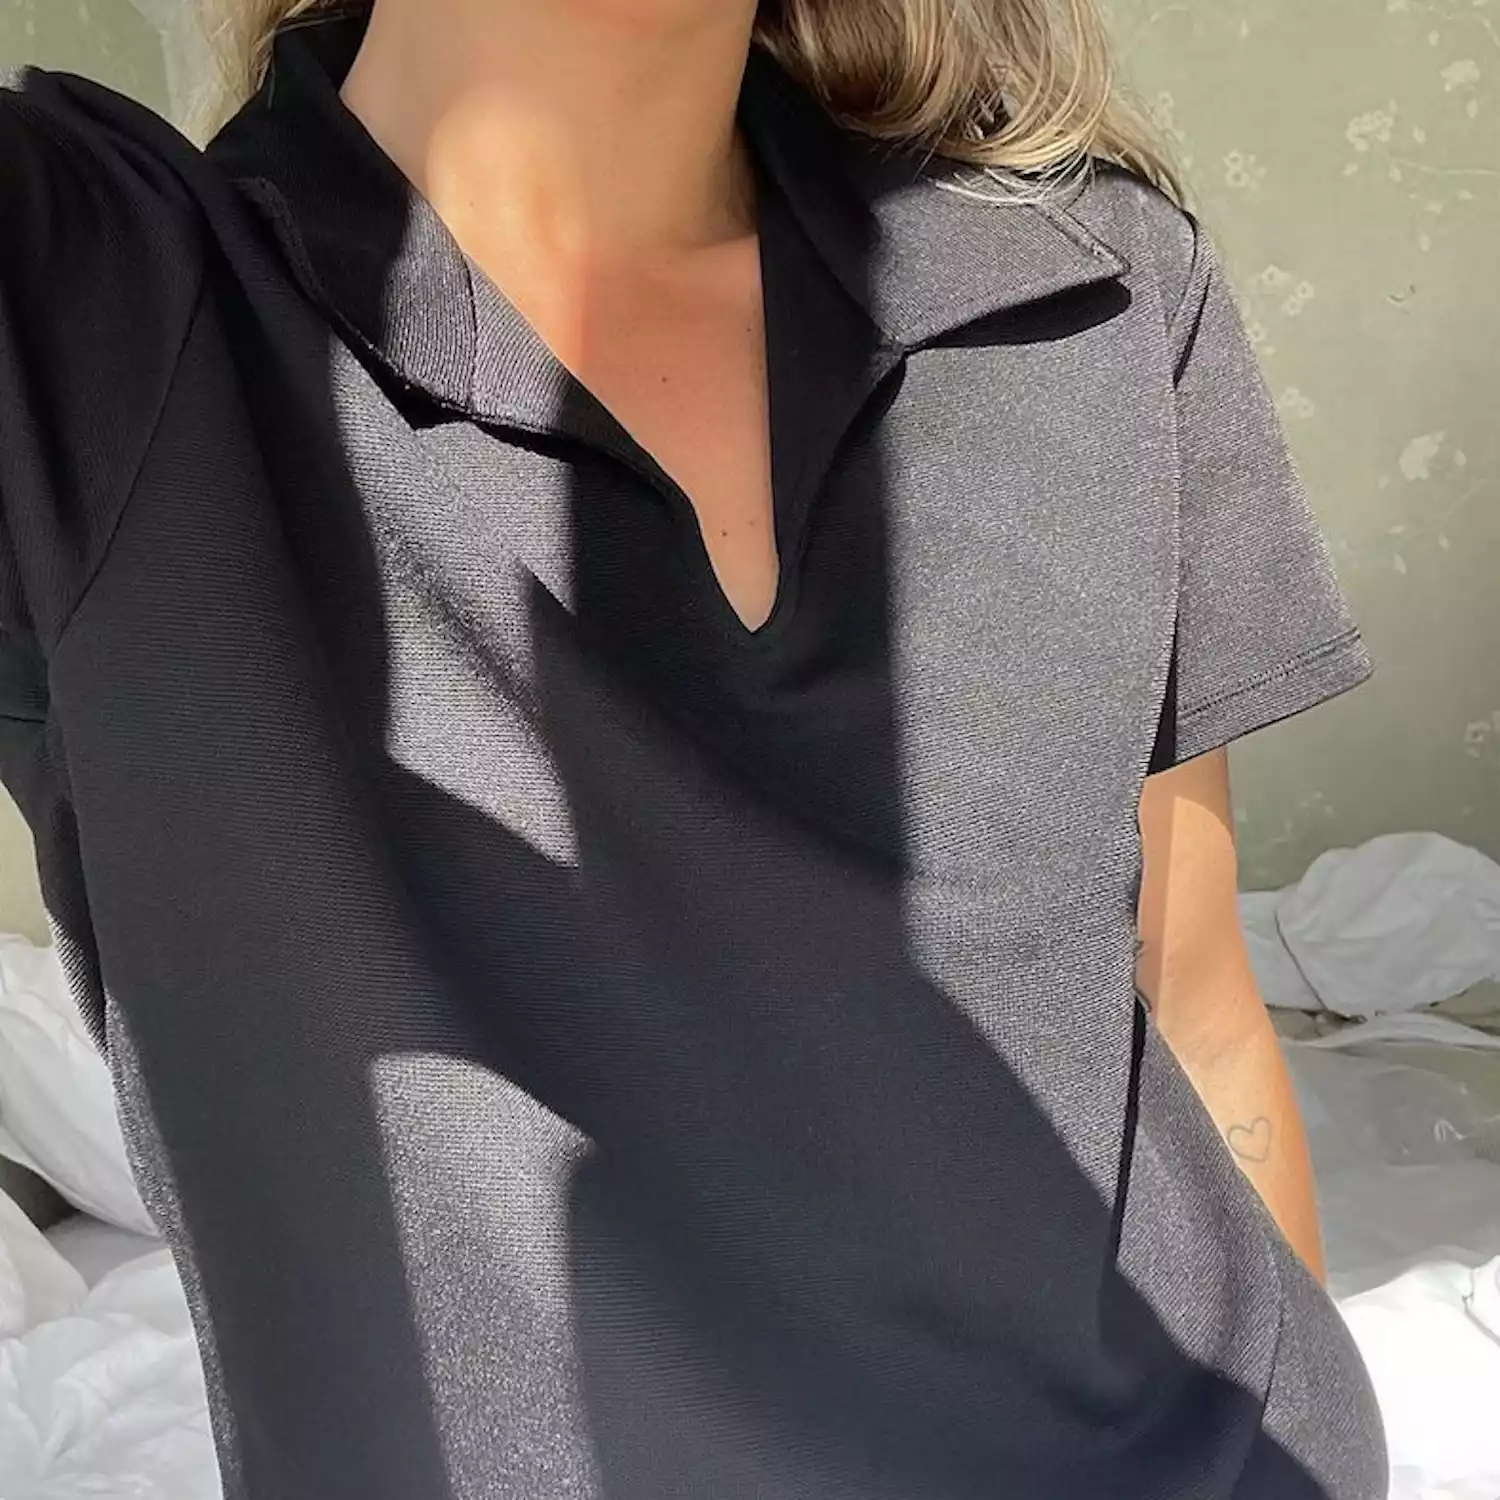 Matilda Djerf wears a black collared short-sleeved shirt with V neck